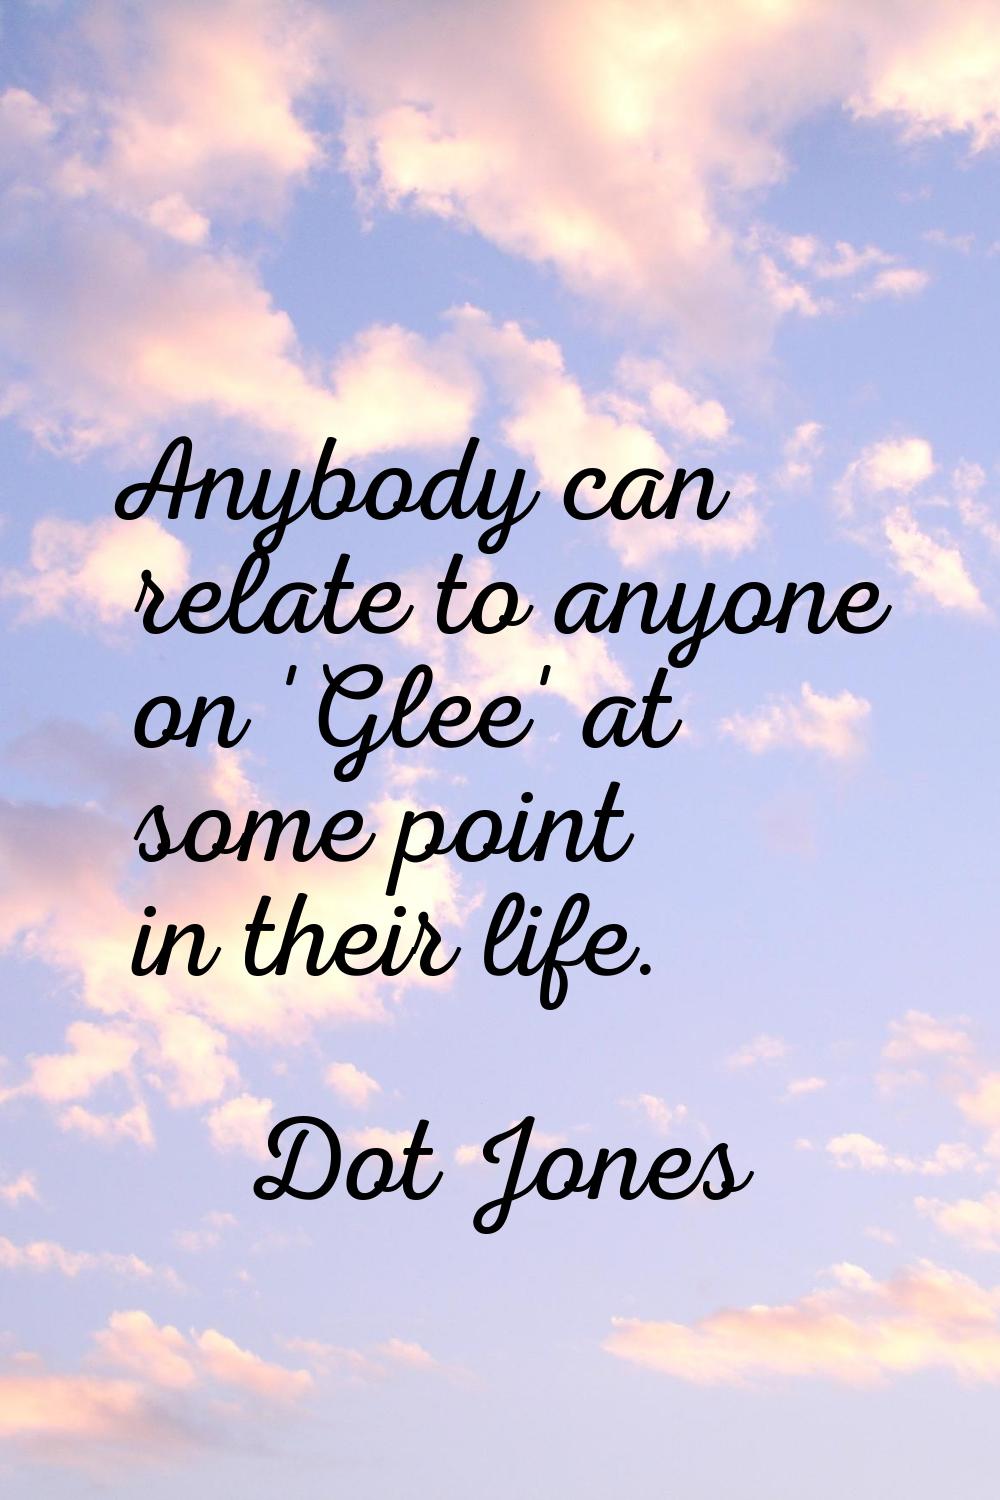 Anybody can relate to anyone on 'Glee' at some point in their life.